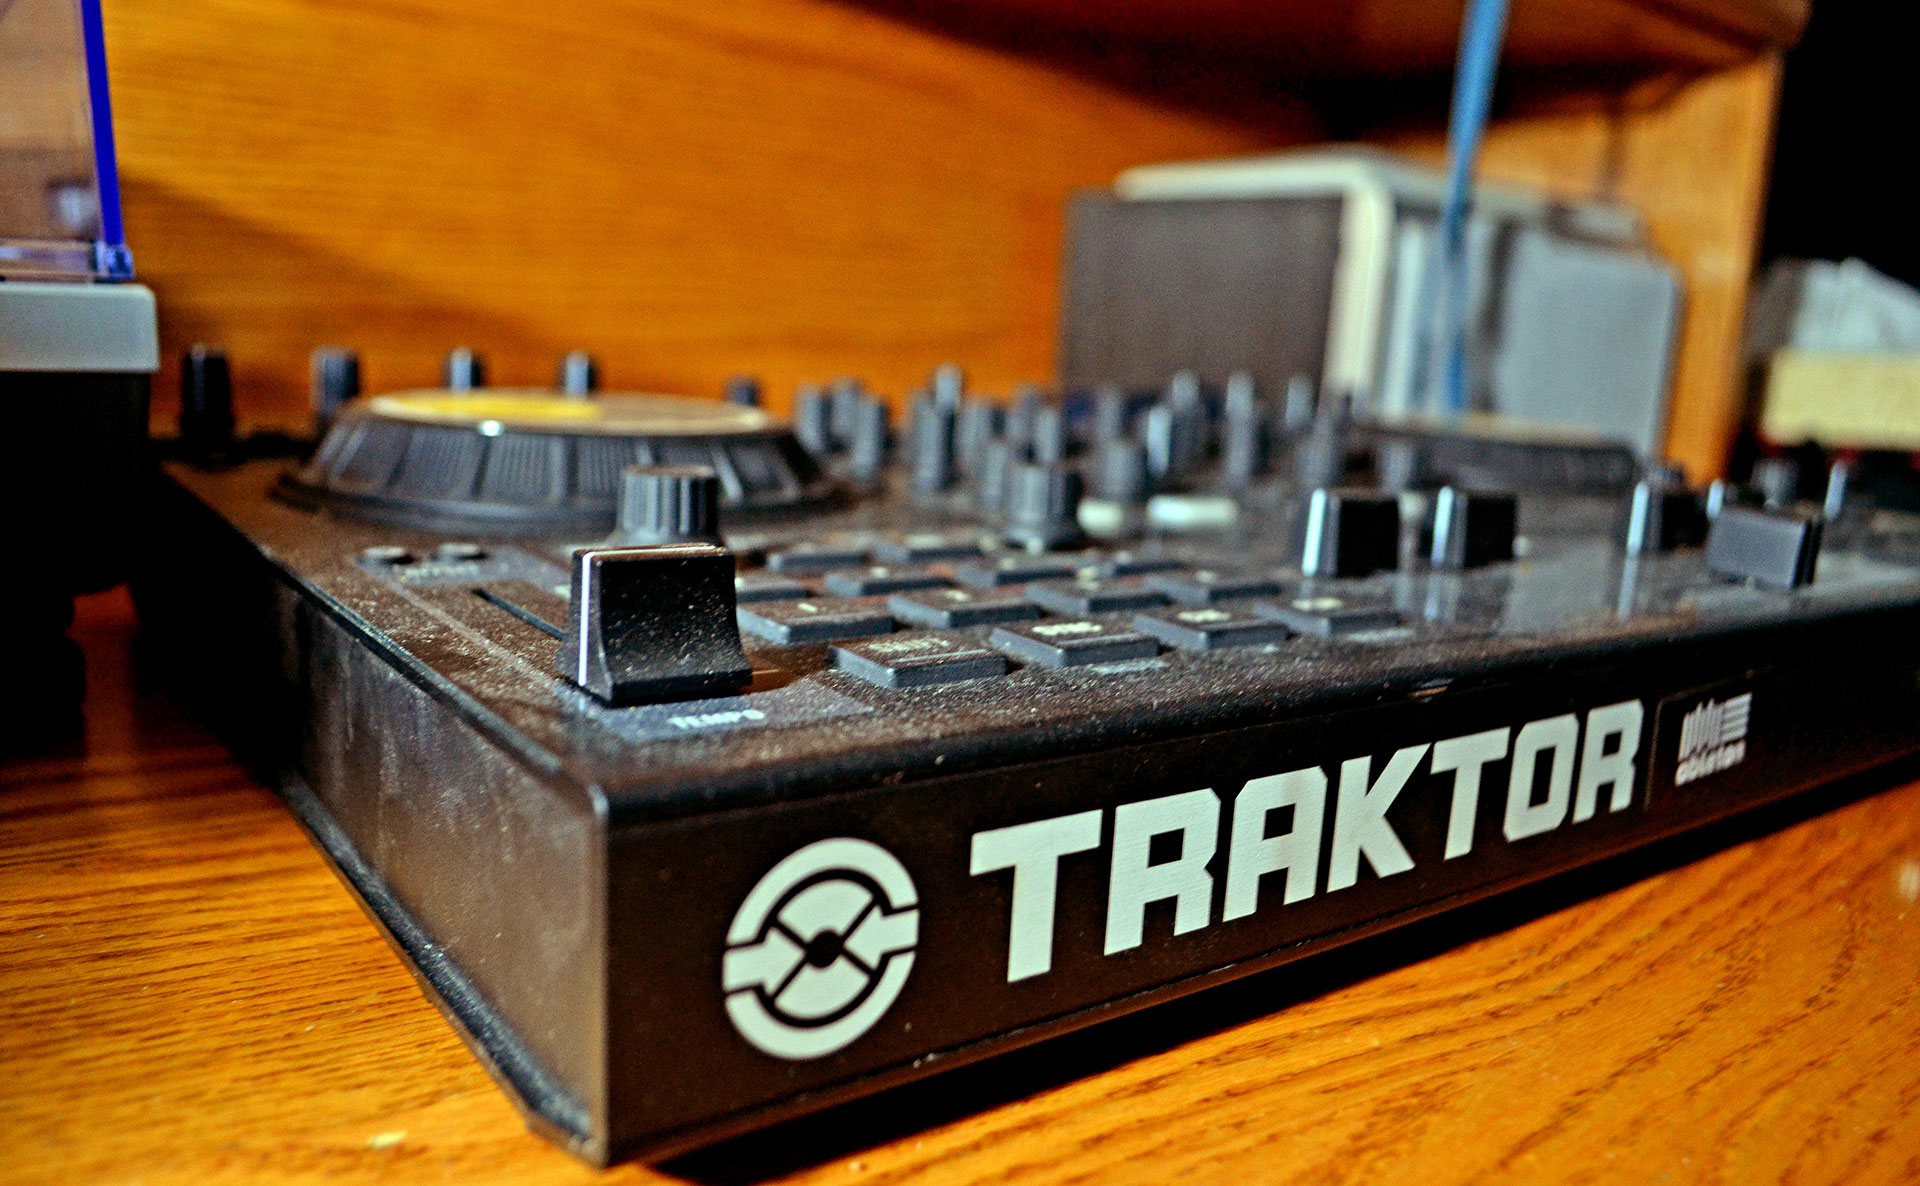 October 10, 2015 | Westlake Village, California | 9:00pm |
Seven years ago, Spencer Thibo began producing music and graduated from a presti- gious school, mastering the production of electronic music. He has his very own studio in his room with thousands of dollars worth of equipment. This is a traktor, or essential- ly a mixer that is used to blend songs together to create a certain atmosphere or story for the audience. It has effect knobs, faders and a track deck, necessary in music production.